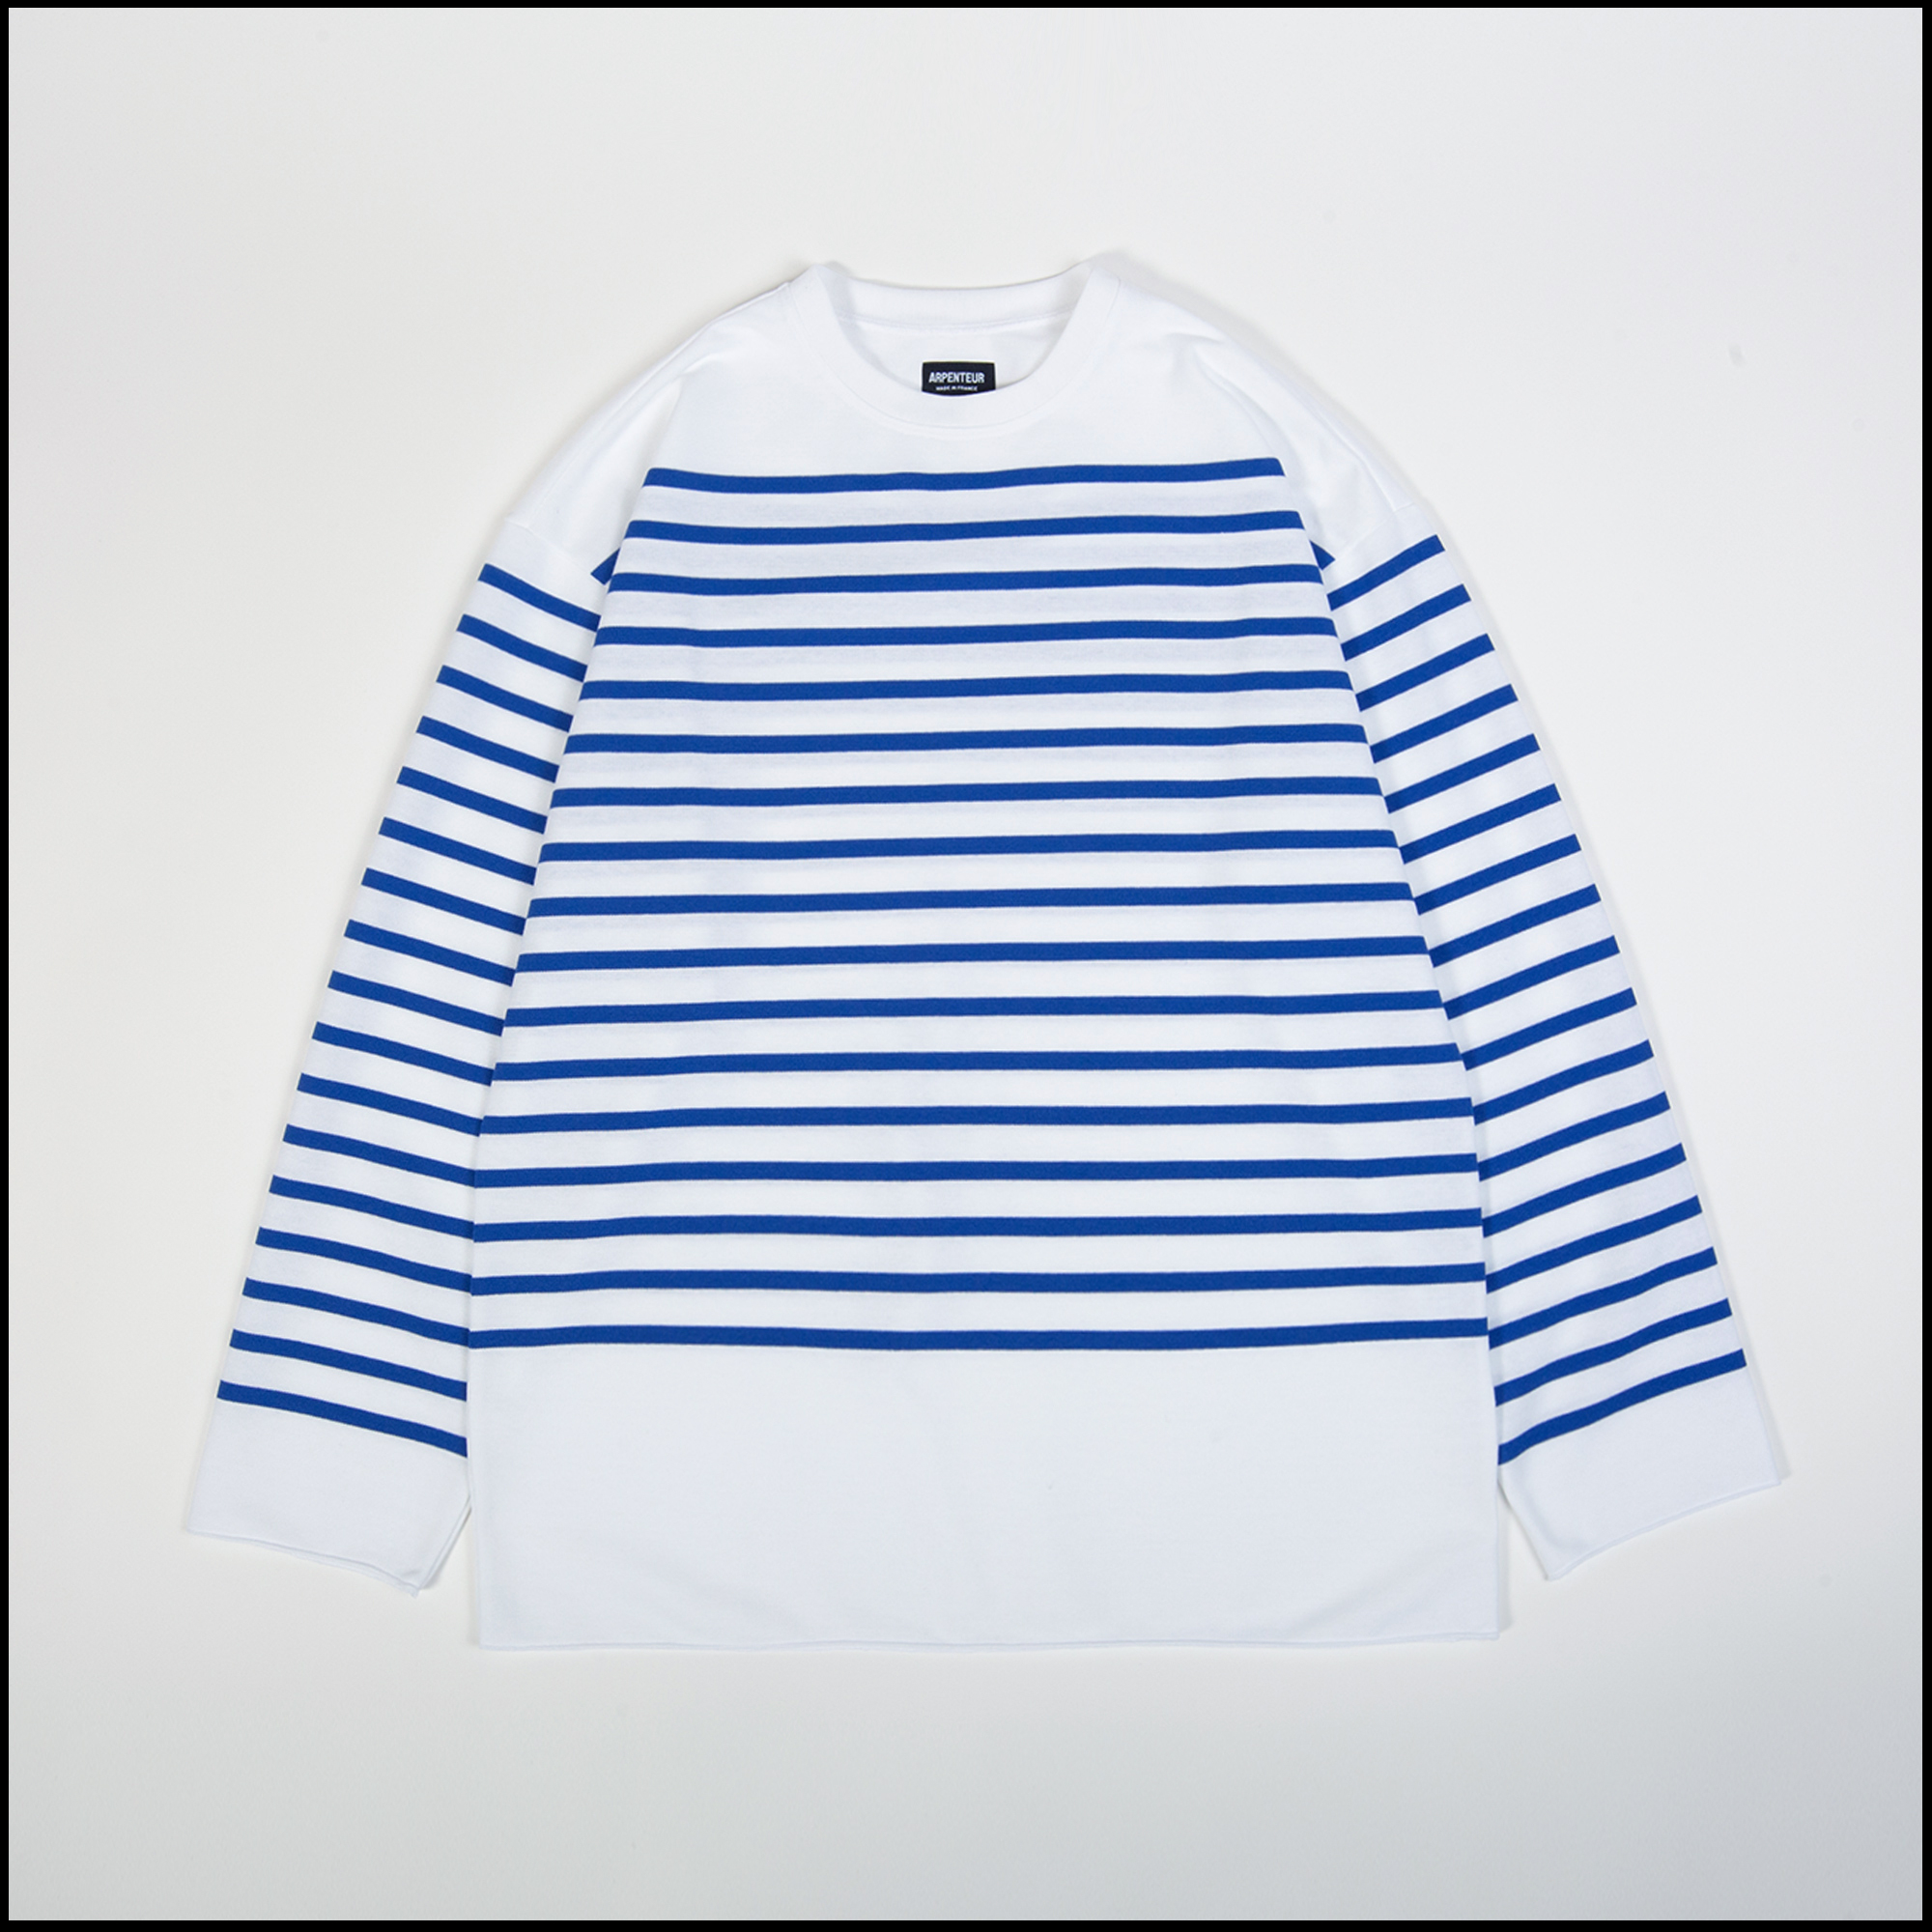 MARINE t-shirt in White Blue stripes color by Arpenteur